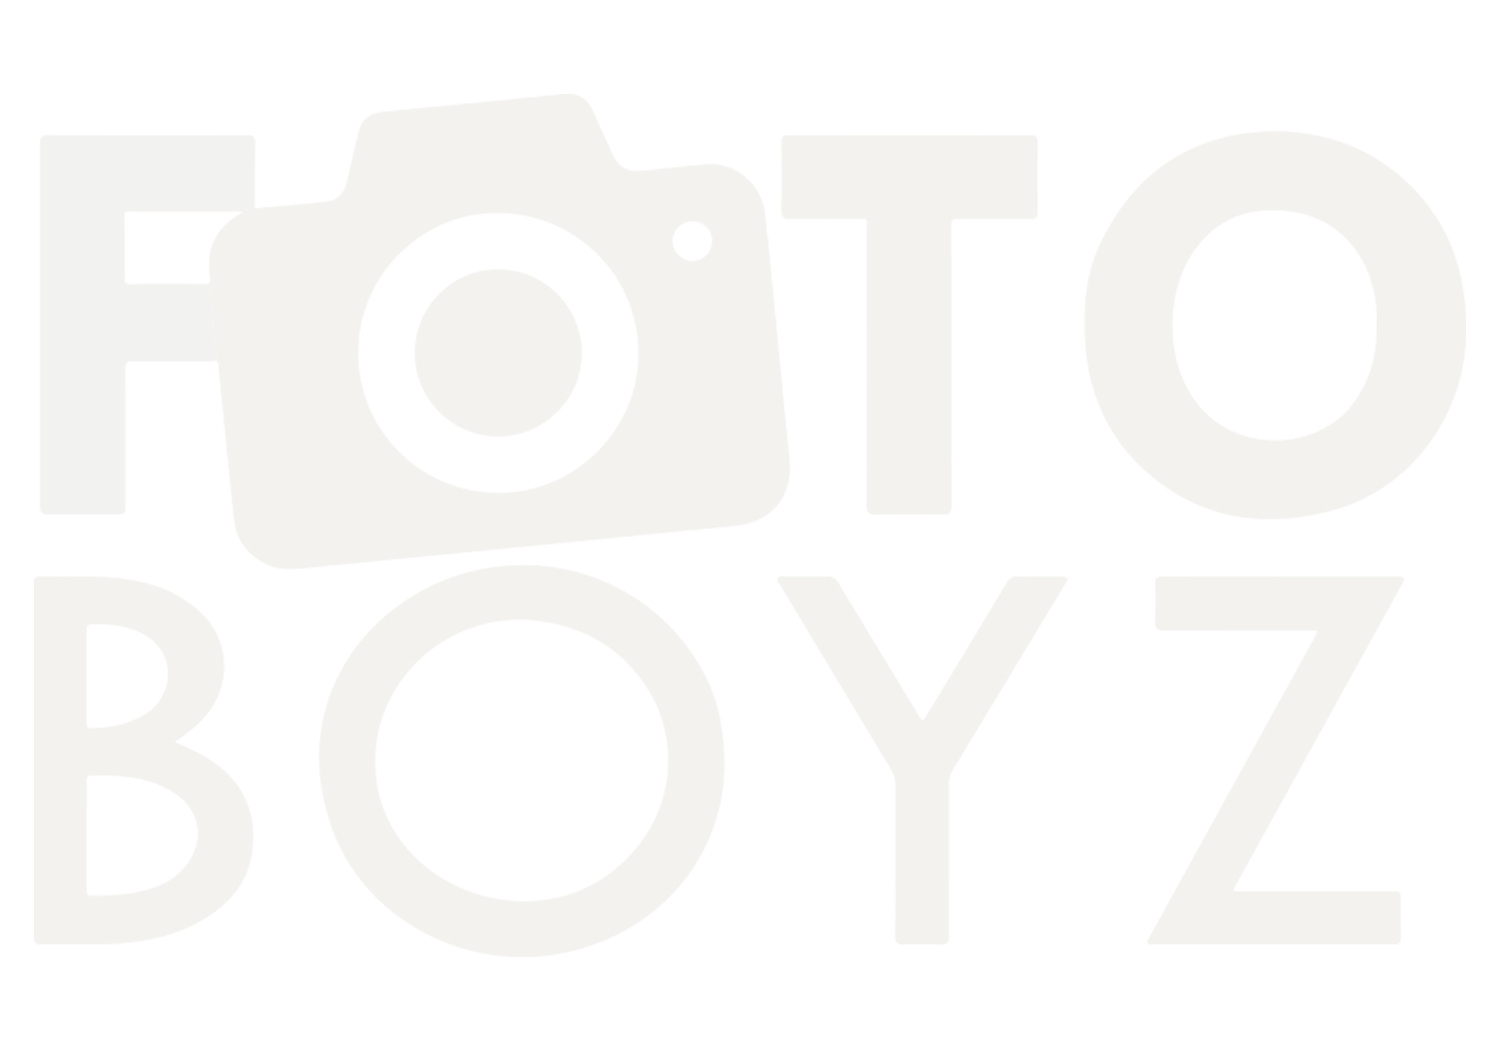 Fotoboyz Photo Booths, Games, and More!